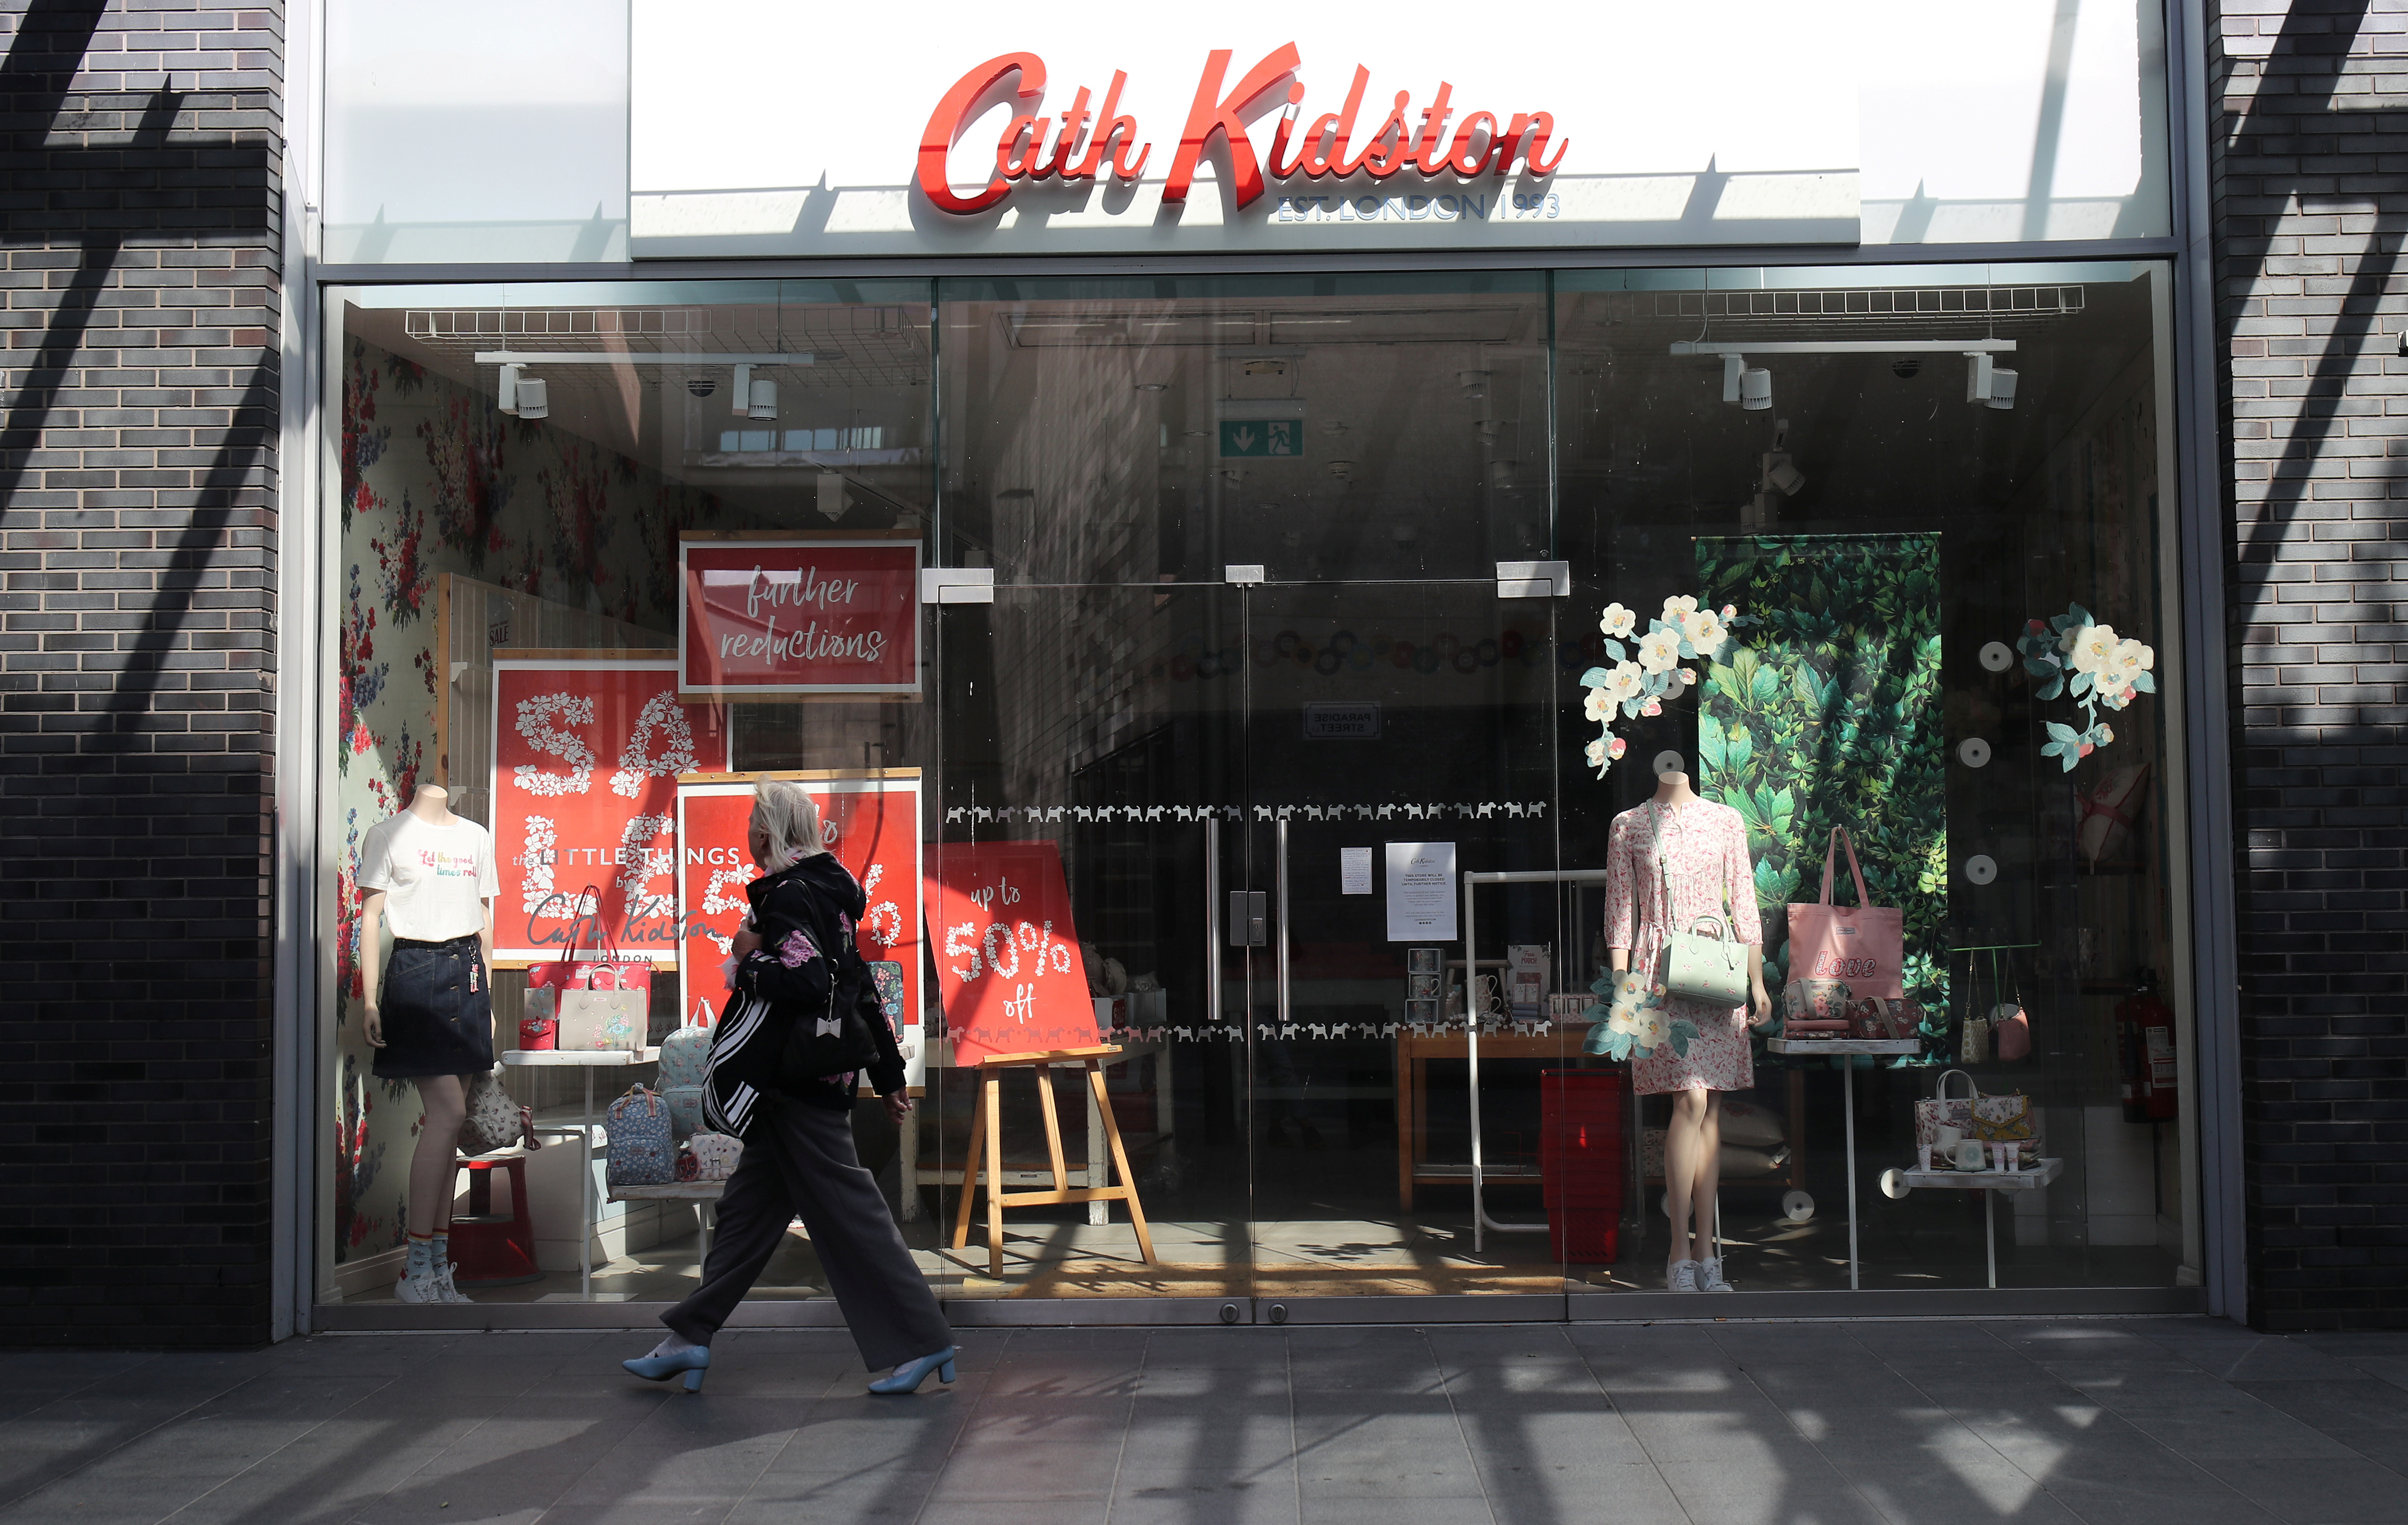 UK's Next buys troubled retailer Cath Kidston for $10.5 mln | Reuters